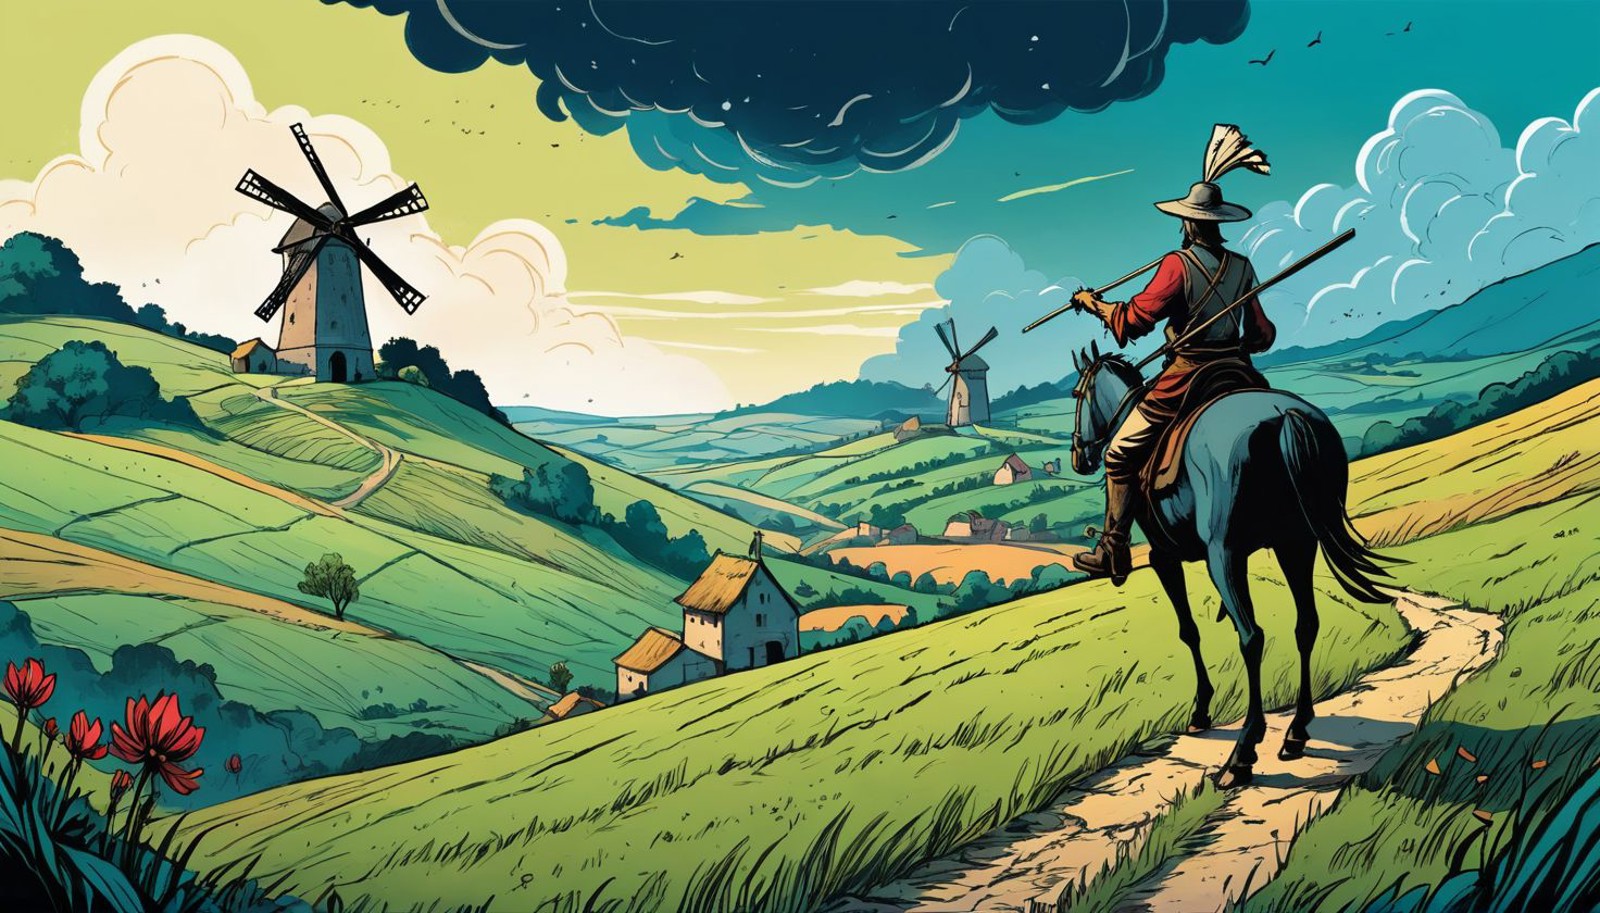 graphic novel illustration (vibrant:0.7) dark comic book ink style,don quichotte, mill wind, intricate landscape